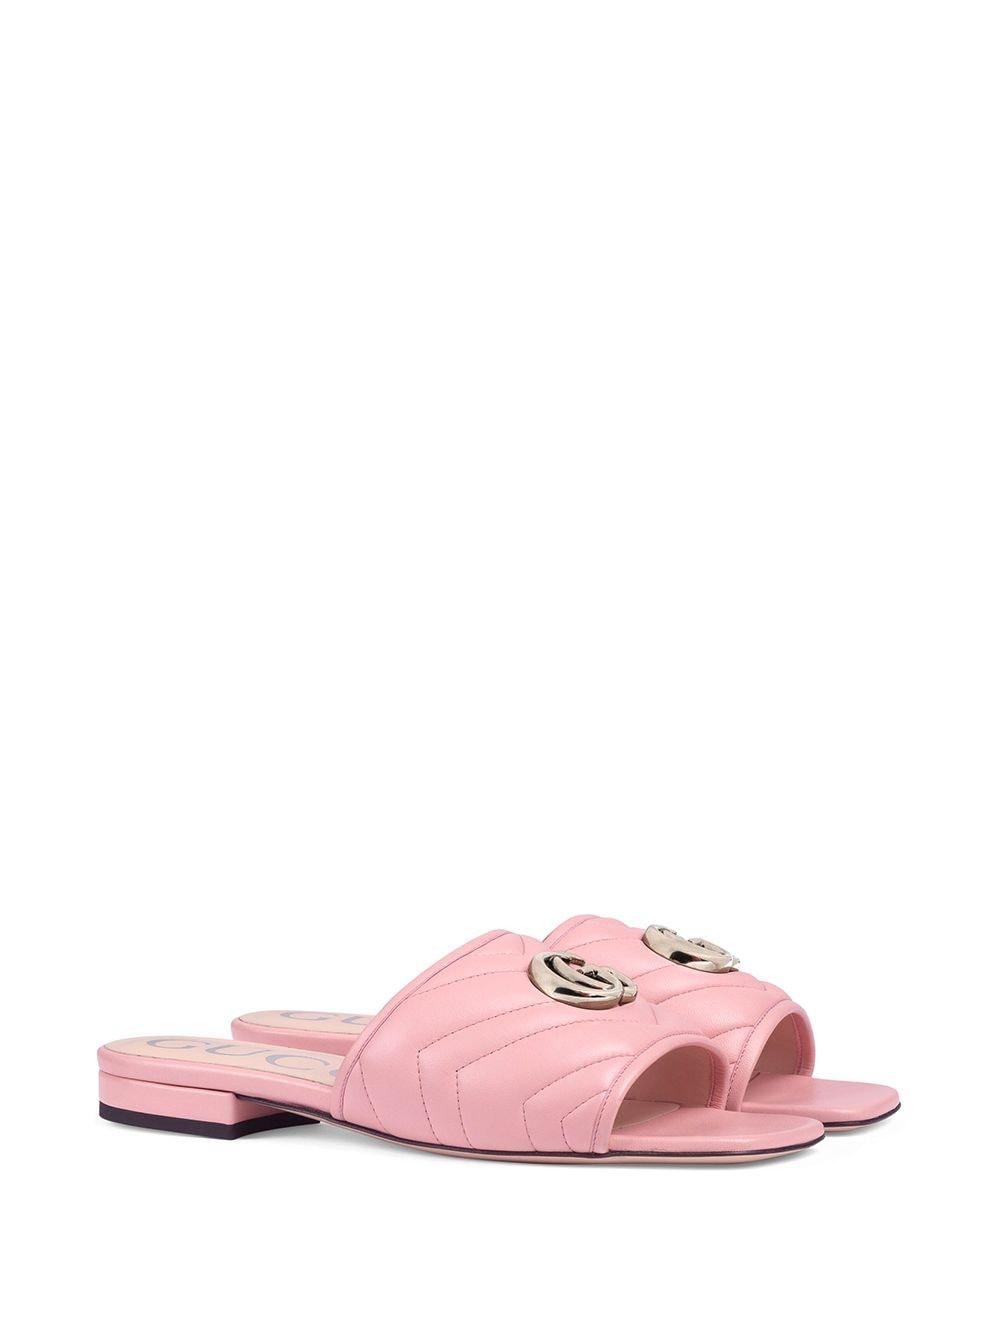 Gucci Quilted GG Motif Sandals in Pink - Lyst